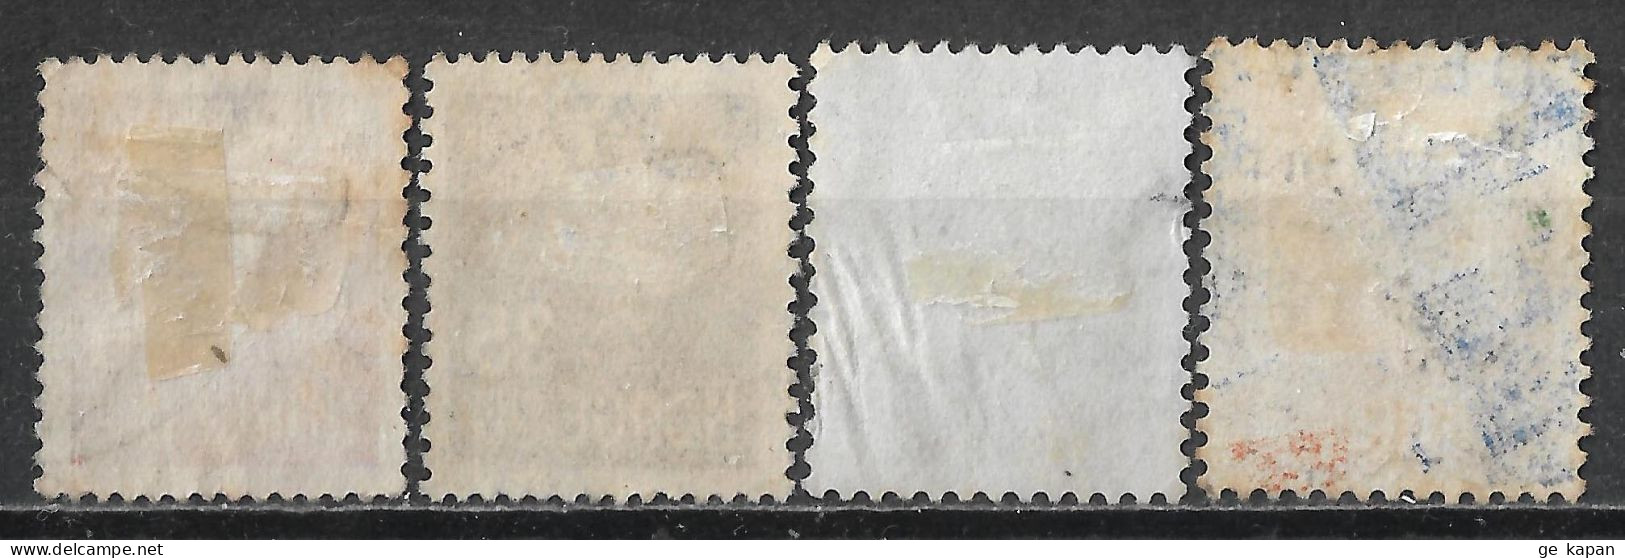 1927-1946 NORWAY SET OF 4 USED STAMPS (Michel # 124A,128A,220,321) - Gebraucht